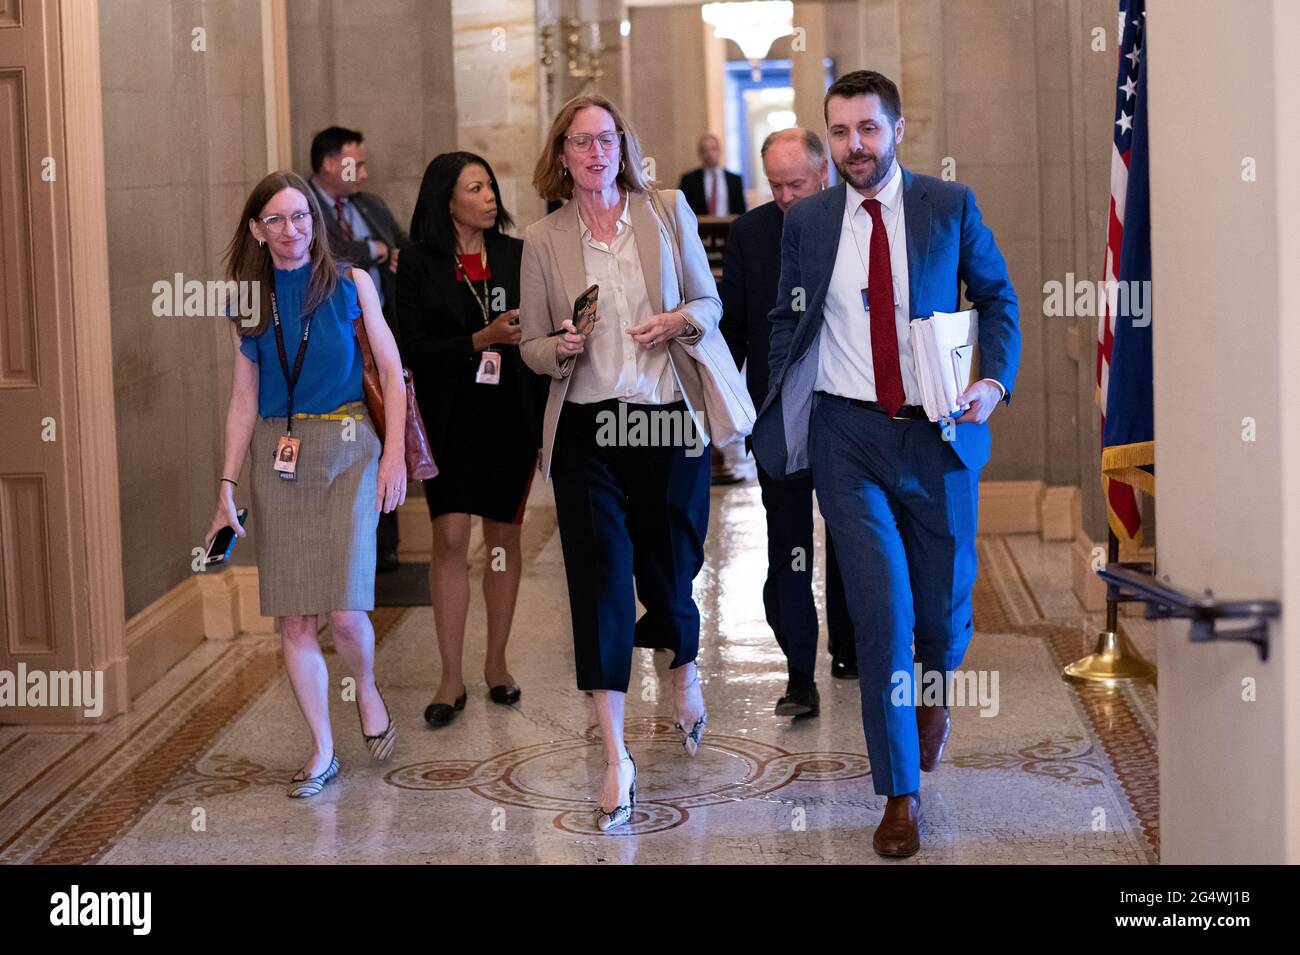 Louisa Terrell, White House Legislative Affairs Director, center, Brian Deese, Director of the National Economic Council, right, and Steve Richetti, Counselor to the President, rear, leave a bipartisan meeting of Senators where they discussed infrastructure legislation, at the U.S. Capitol, in Washington, D.C., on Wednesday, June 23, 2021. Last night Senate Republicans filibustered a voting rights bill as bipartisan negotiations over infrastructure legislation grind on with little apparent progress building a package to beat the 60-vote filibuster threshold. (Graeme Sloan/Sipa USA) Stock Photo